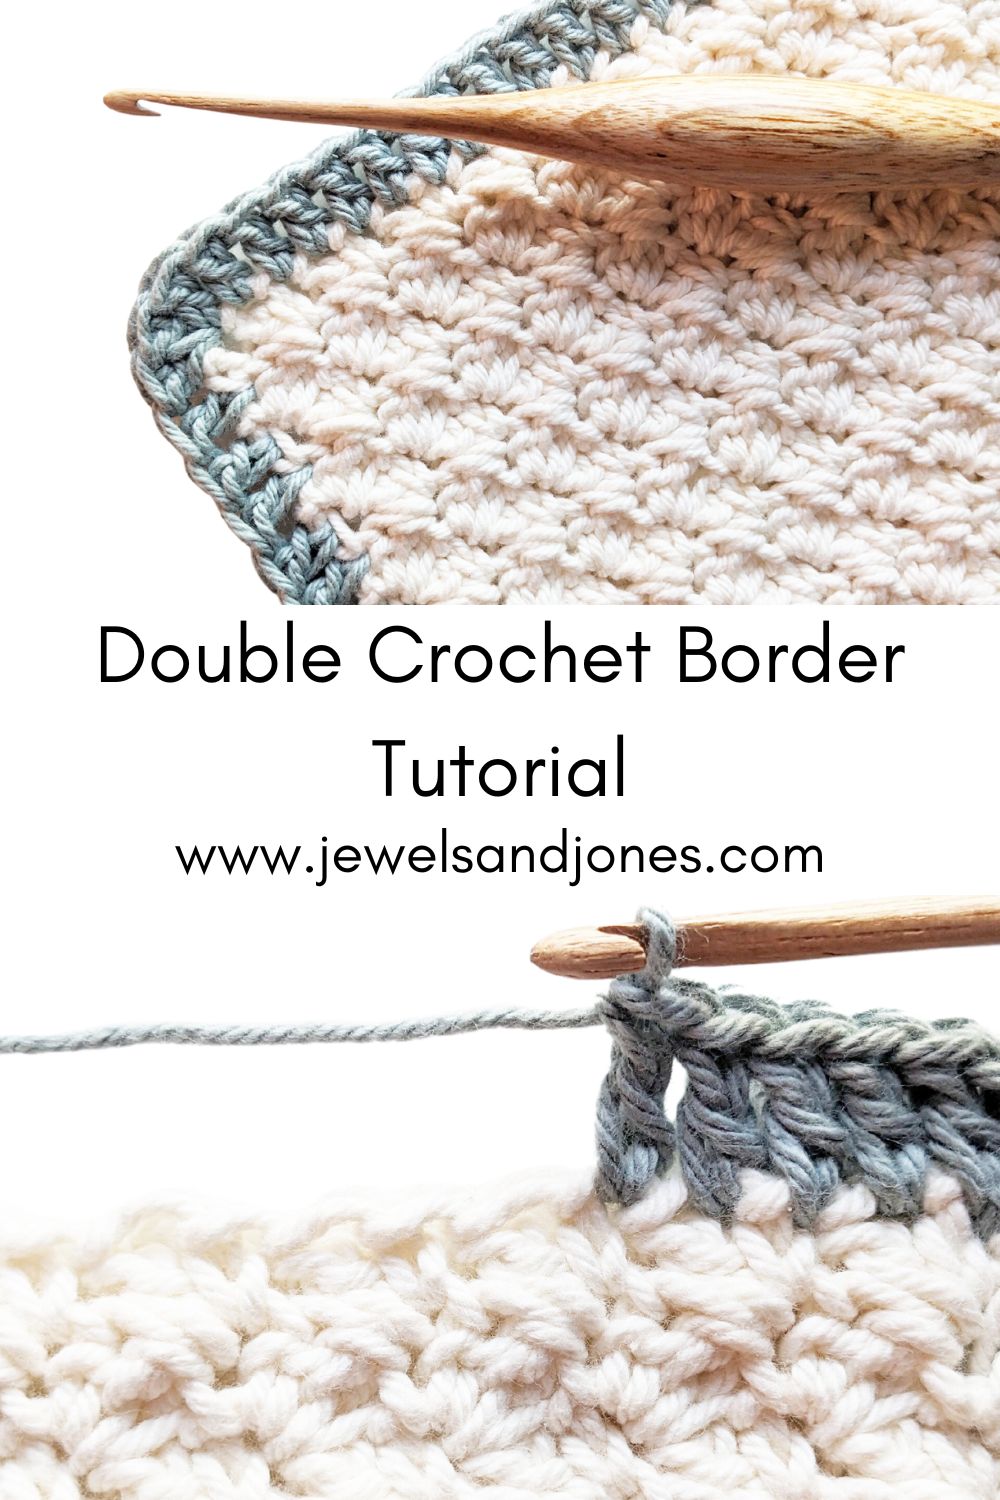 A double crochet border made with cotton yarn on a blanket.